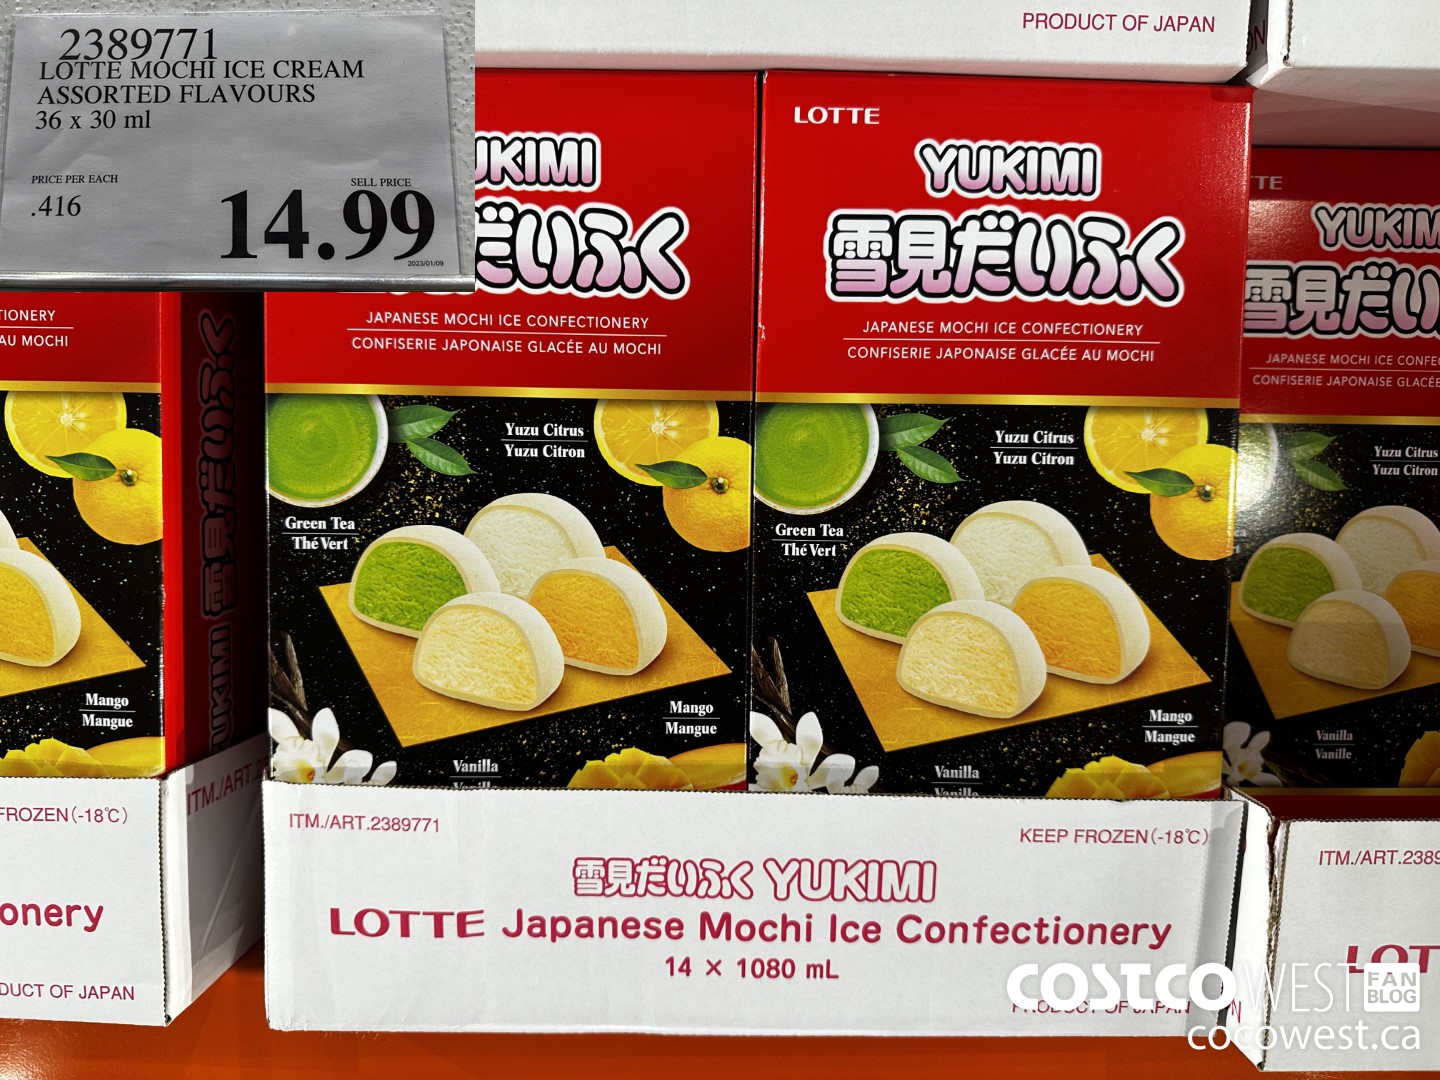 Costco Winter 2023 Superbowl Superpost – The Entire Frozen Food Section! -  Costco West Fan Blog